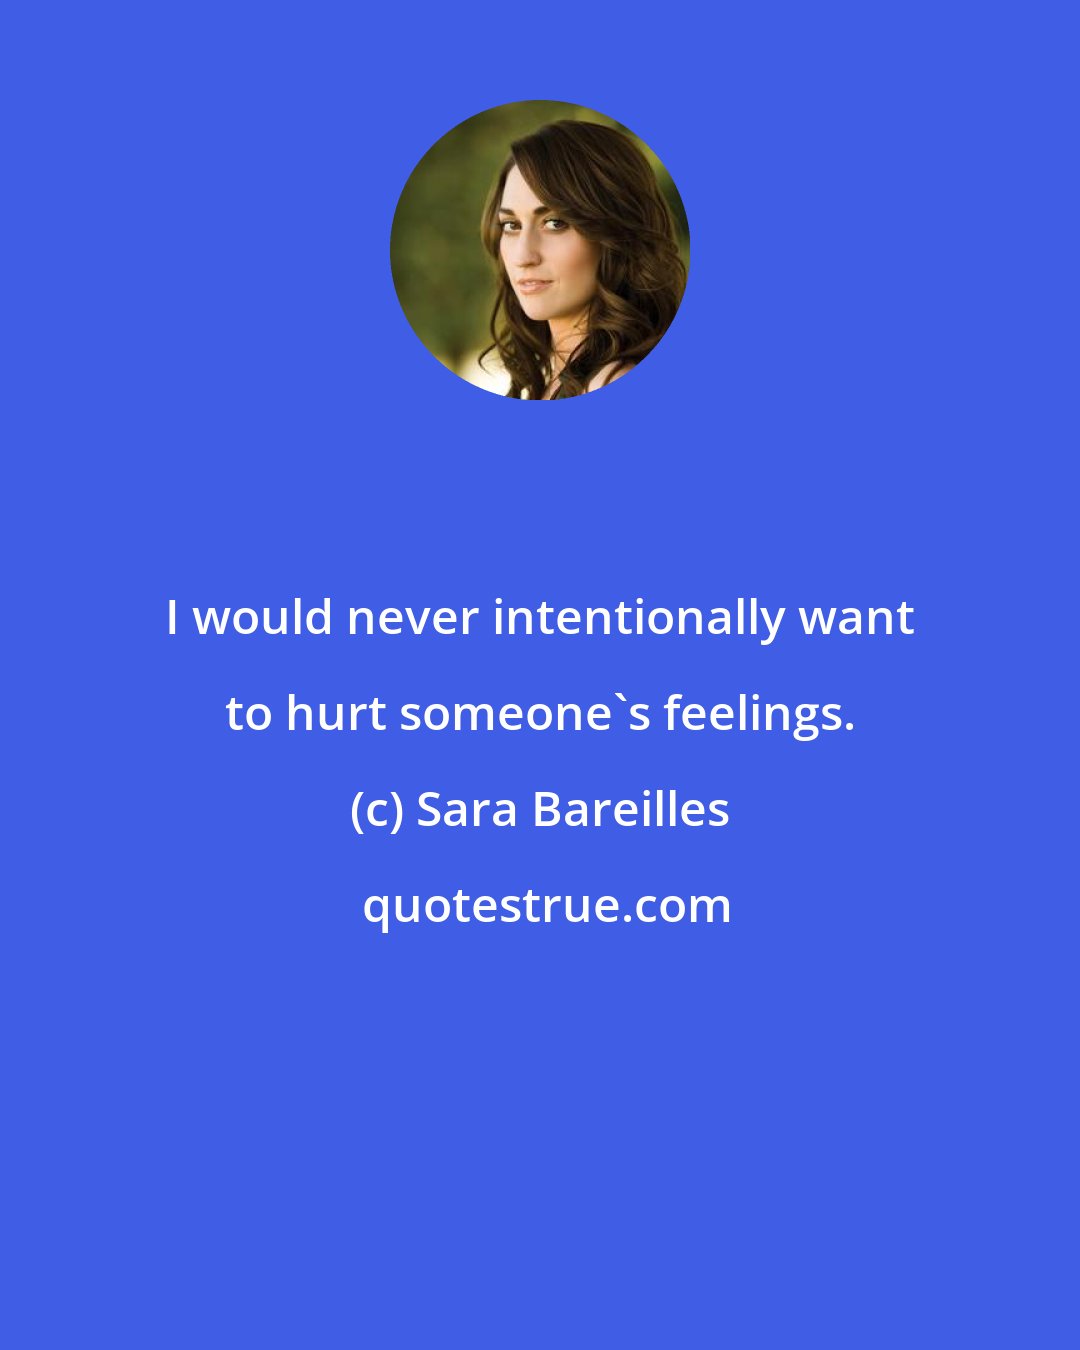 Sara Bareilles: I would never intentionally want to hurt someone's feelings.